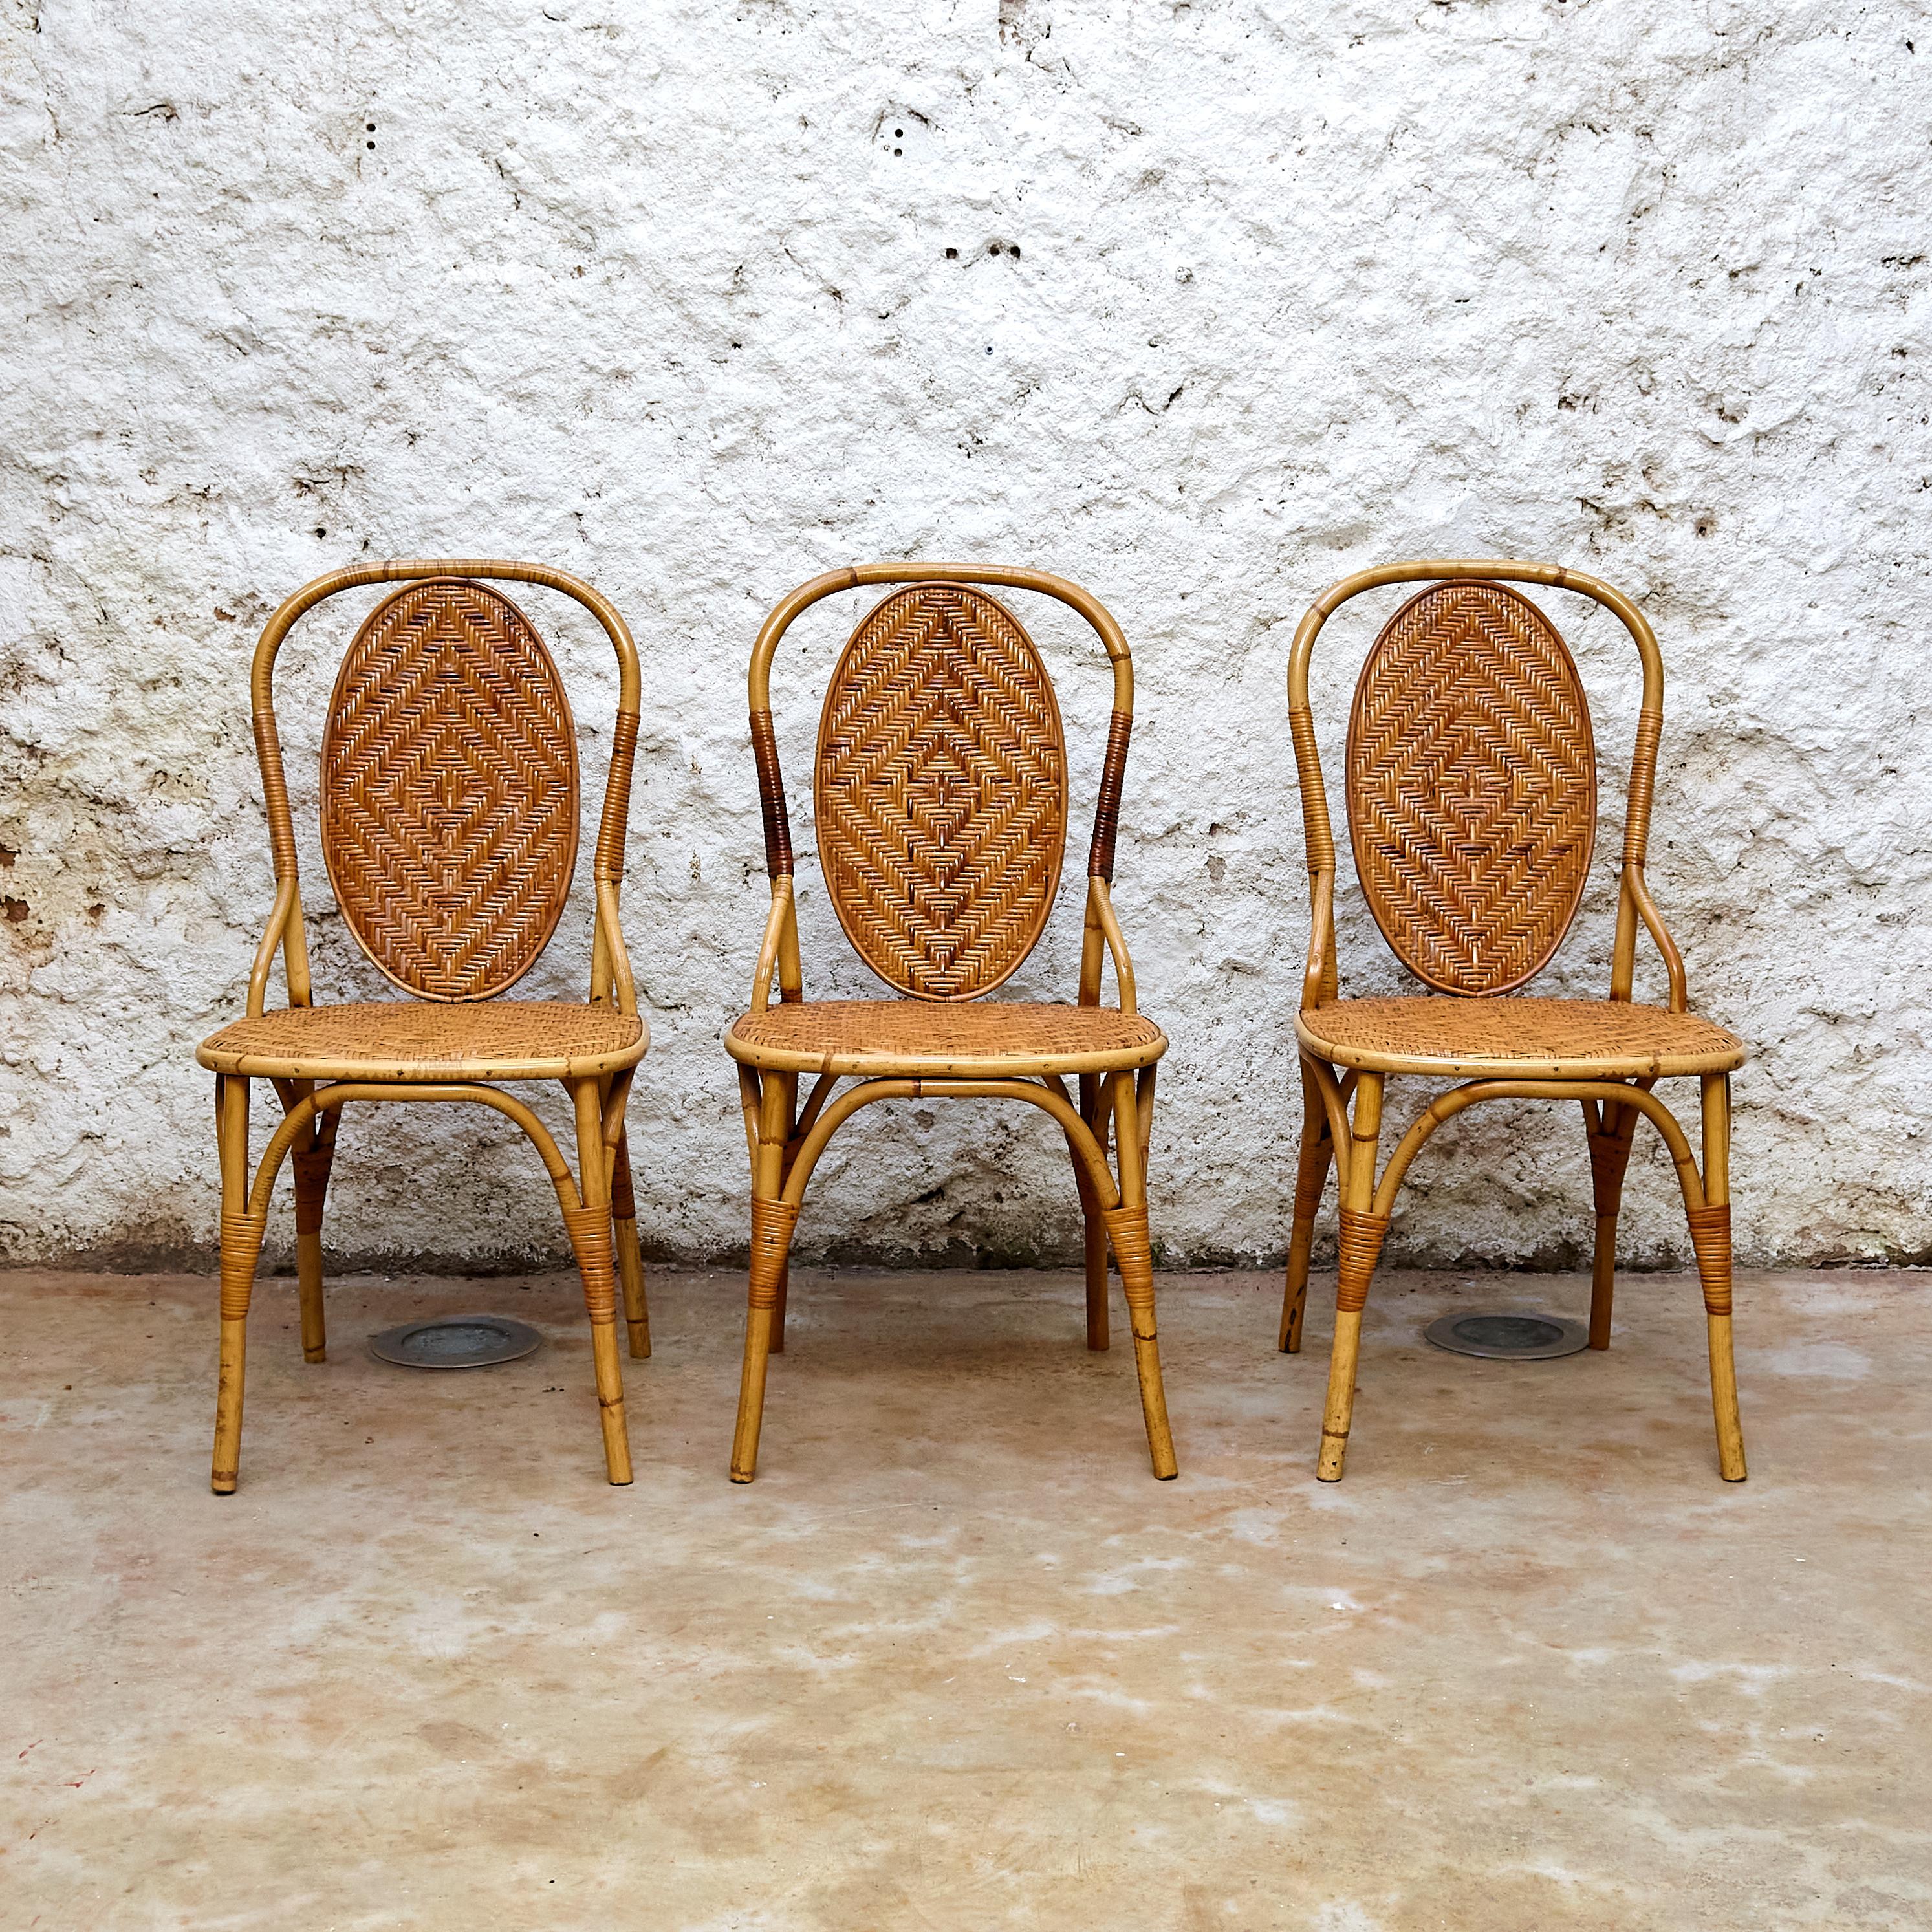 Set of 6 chairs Rombo by Miquel Mila 

Manufactured in Spain, circa 1968.

In original condition with minor wear consistent of age and use, preserving a beautiful patina.

Materials: 
Bamboo, rattan

Dimensions: 
D 52 cm x W 42 cm x H 85